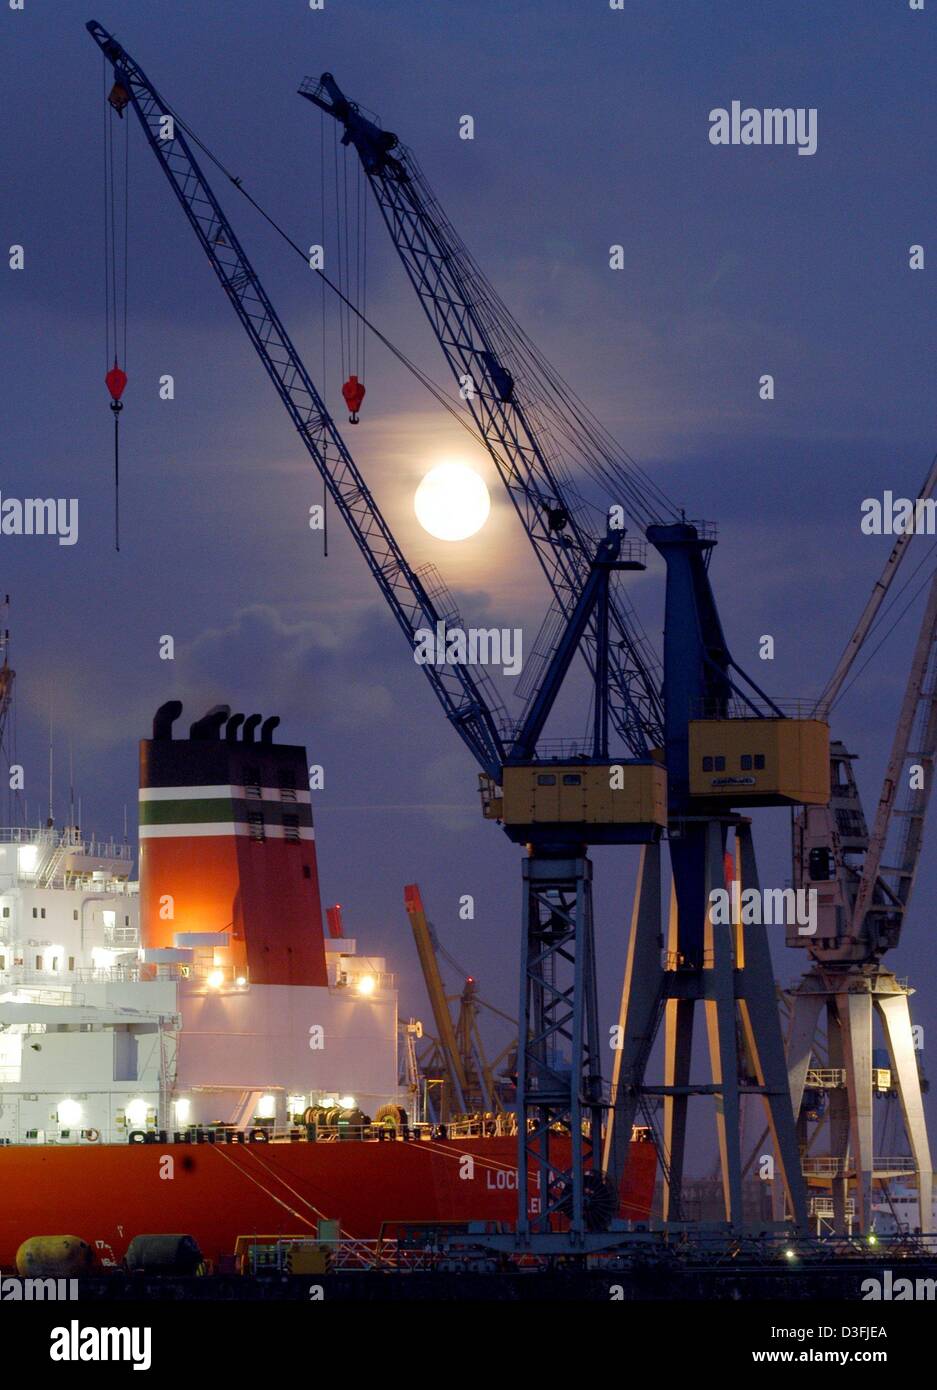 (dpa) - Full moon rises above three loading cranes and an illuminated freigther at a dock yard in the harbour in Hamburg, Germany, 12 July 2003. Economic prospects in the Euro area remain bleak for the short-term. According to projections by the European commission the economic growth in the Euro area, which consists of 12 national economies, will only grow marginally. Guesses are  Stock Photo